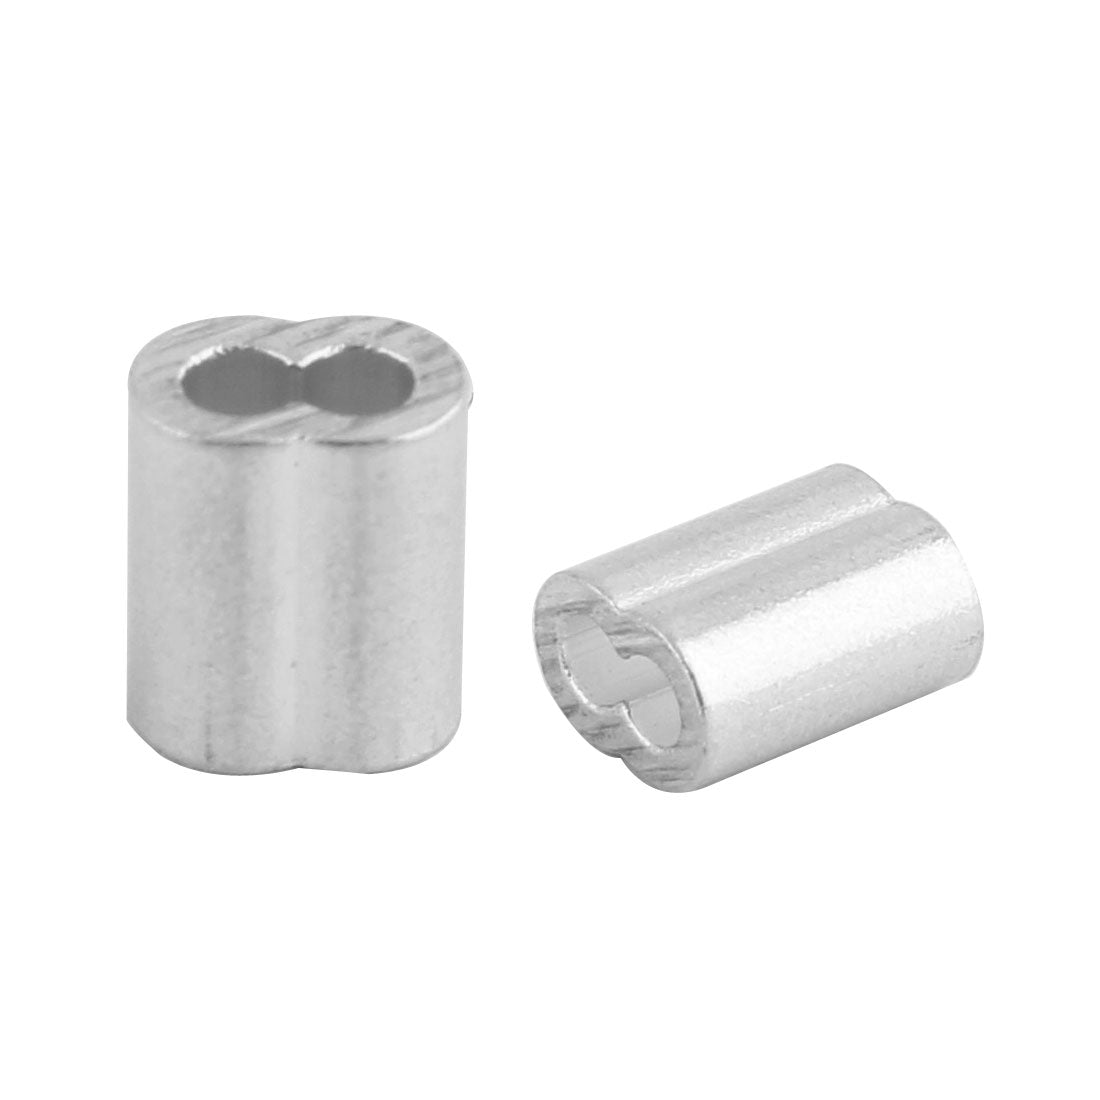 uxcell Uxcell Aluminum Ferrules Sleeves Fittings Clamps 9.0 x 7.4mm 100pcs for 2mm Diameter Steel Wire Rope